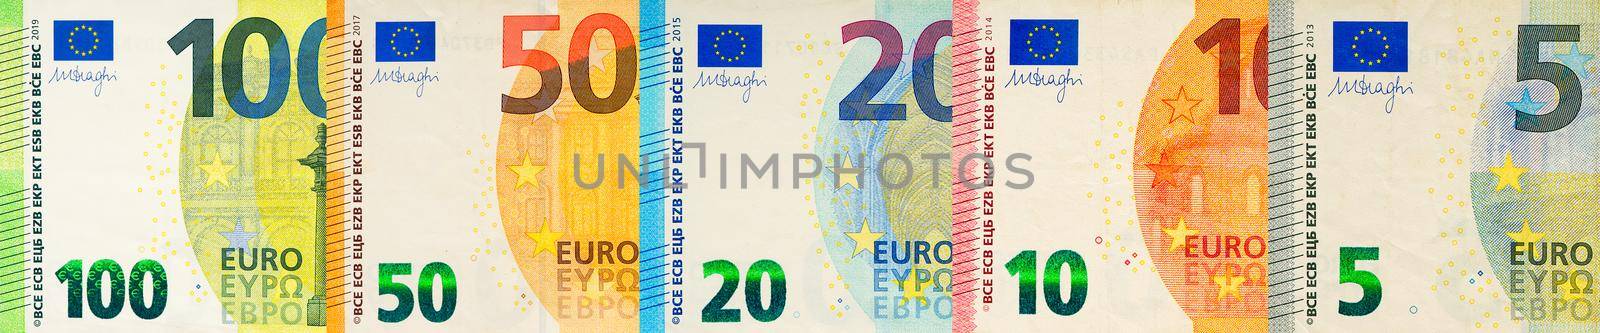 Euro banknotes creative layout. Background from European banknotes, euro. euro money of different denominations abstract background